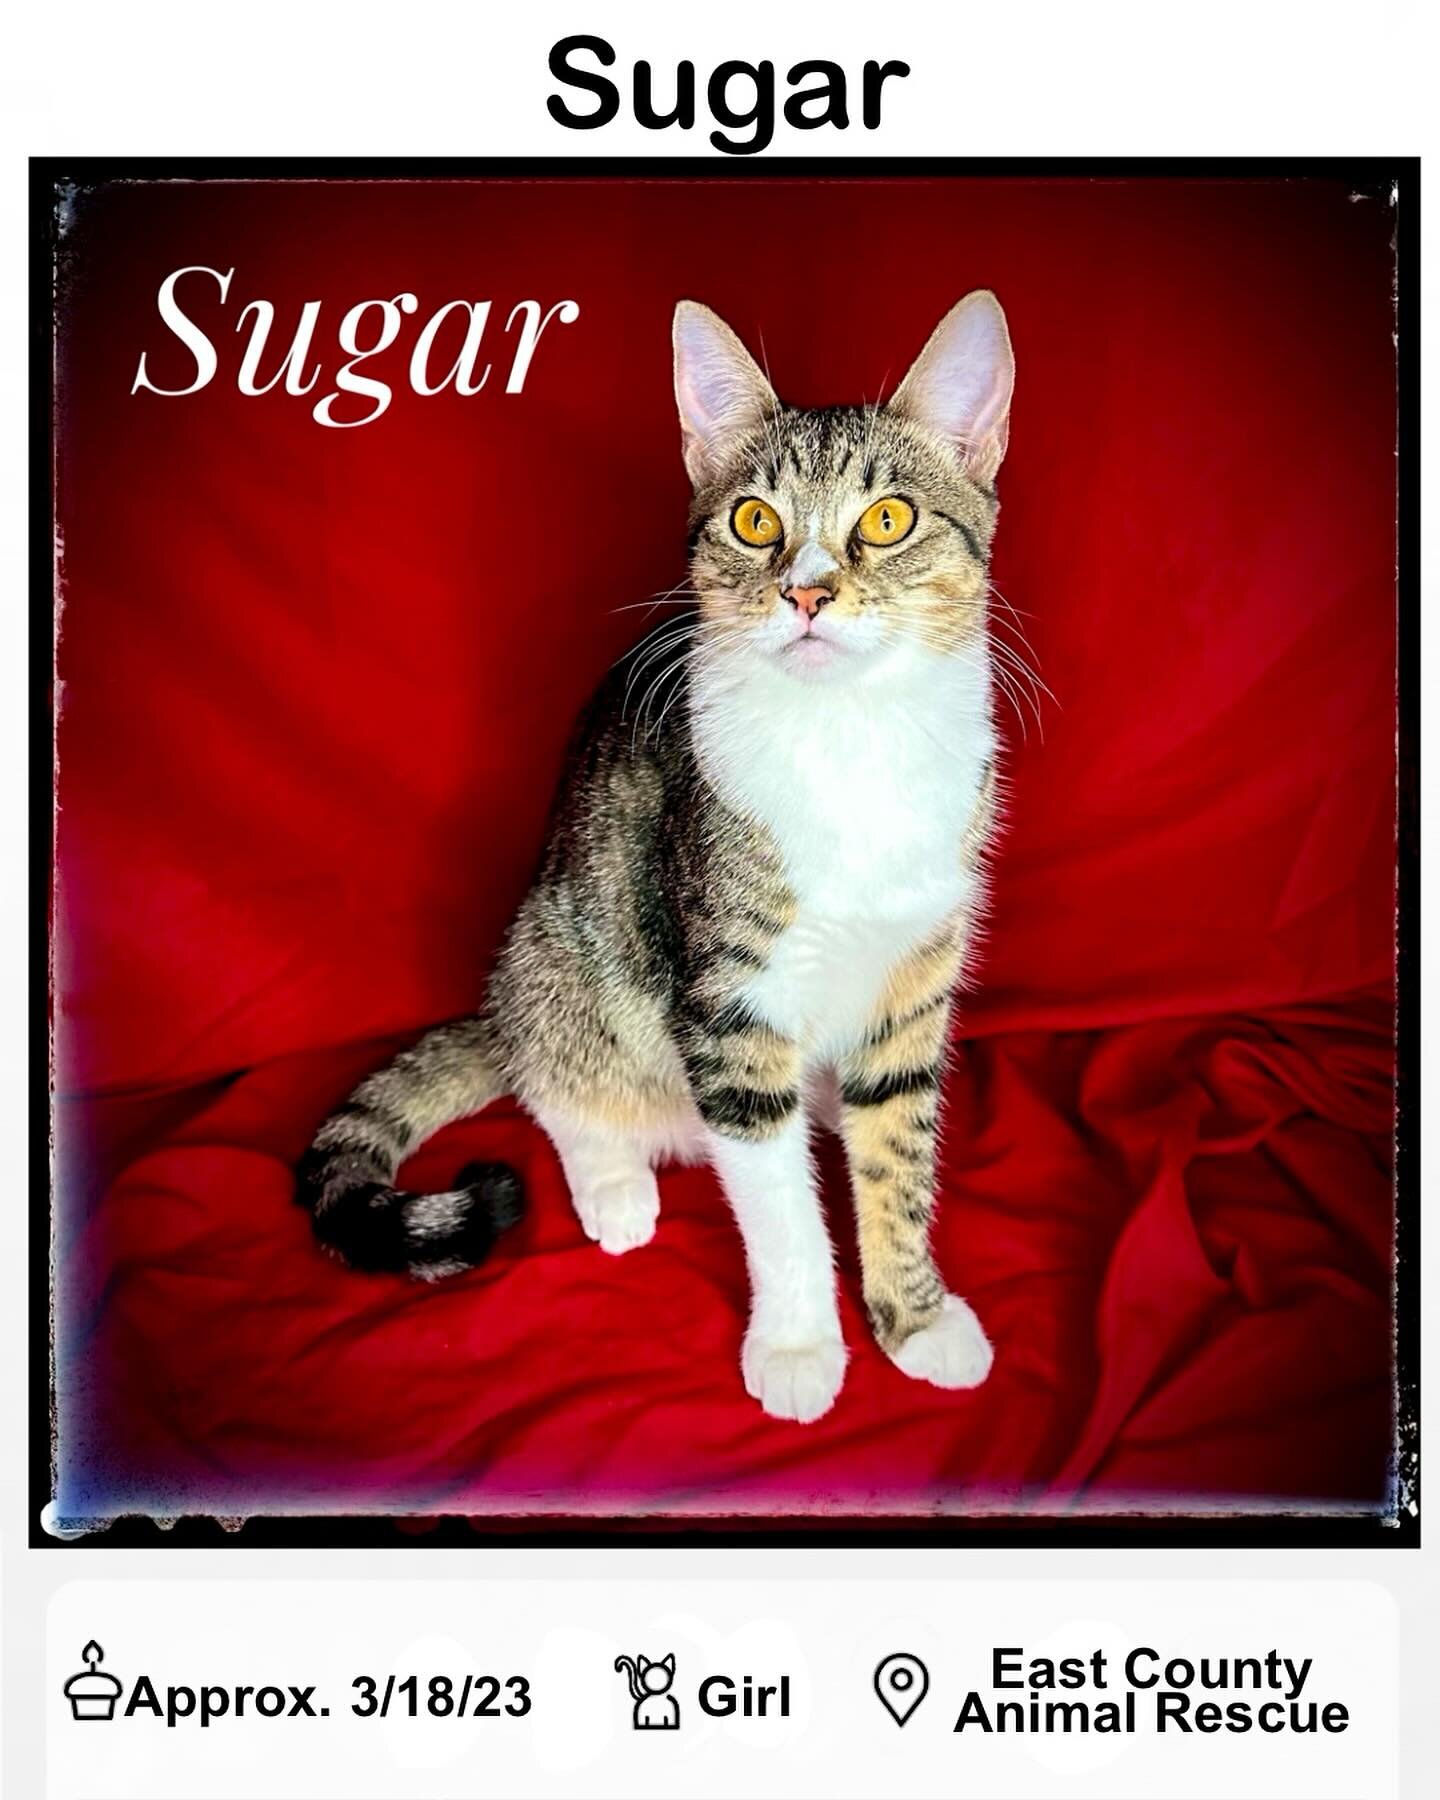 Sugar Sugar
Sweet baby Sugar looooves to snuggle. She&rsquo;s always the first to find a spot on your lap. You lay down and BAM Sugar is on your chest ready to get in a nap. She&rsquo;s a big fan of bird watching &amp; loooooves to play with her sist